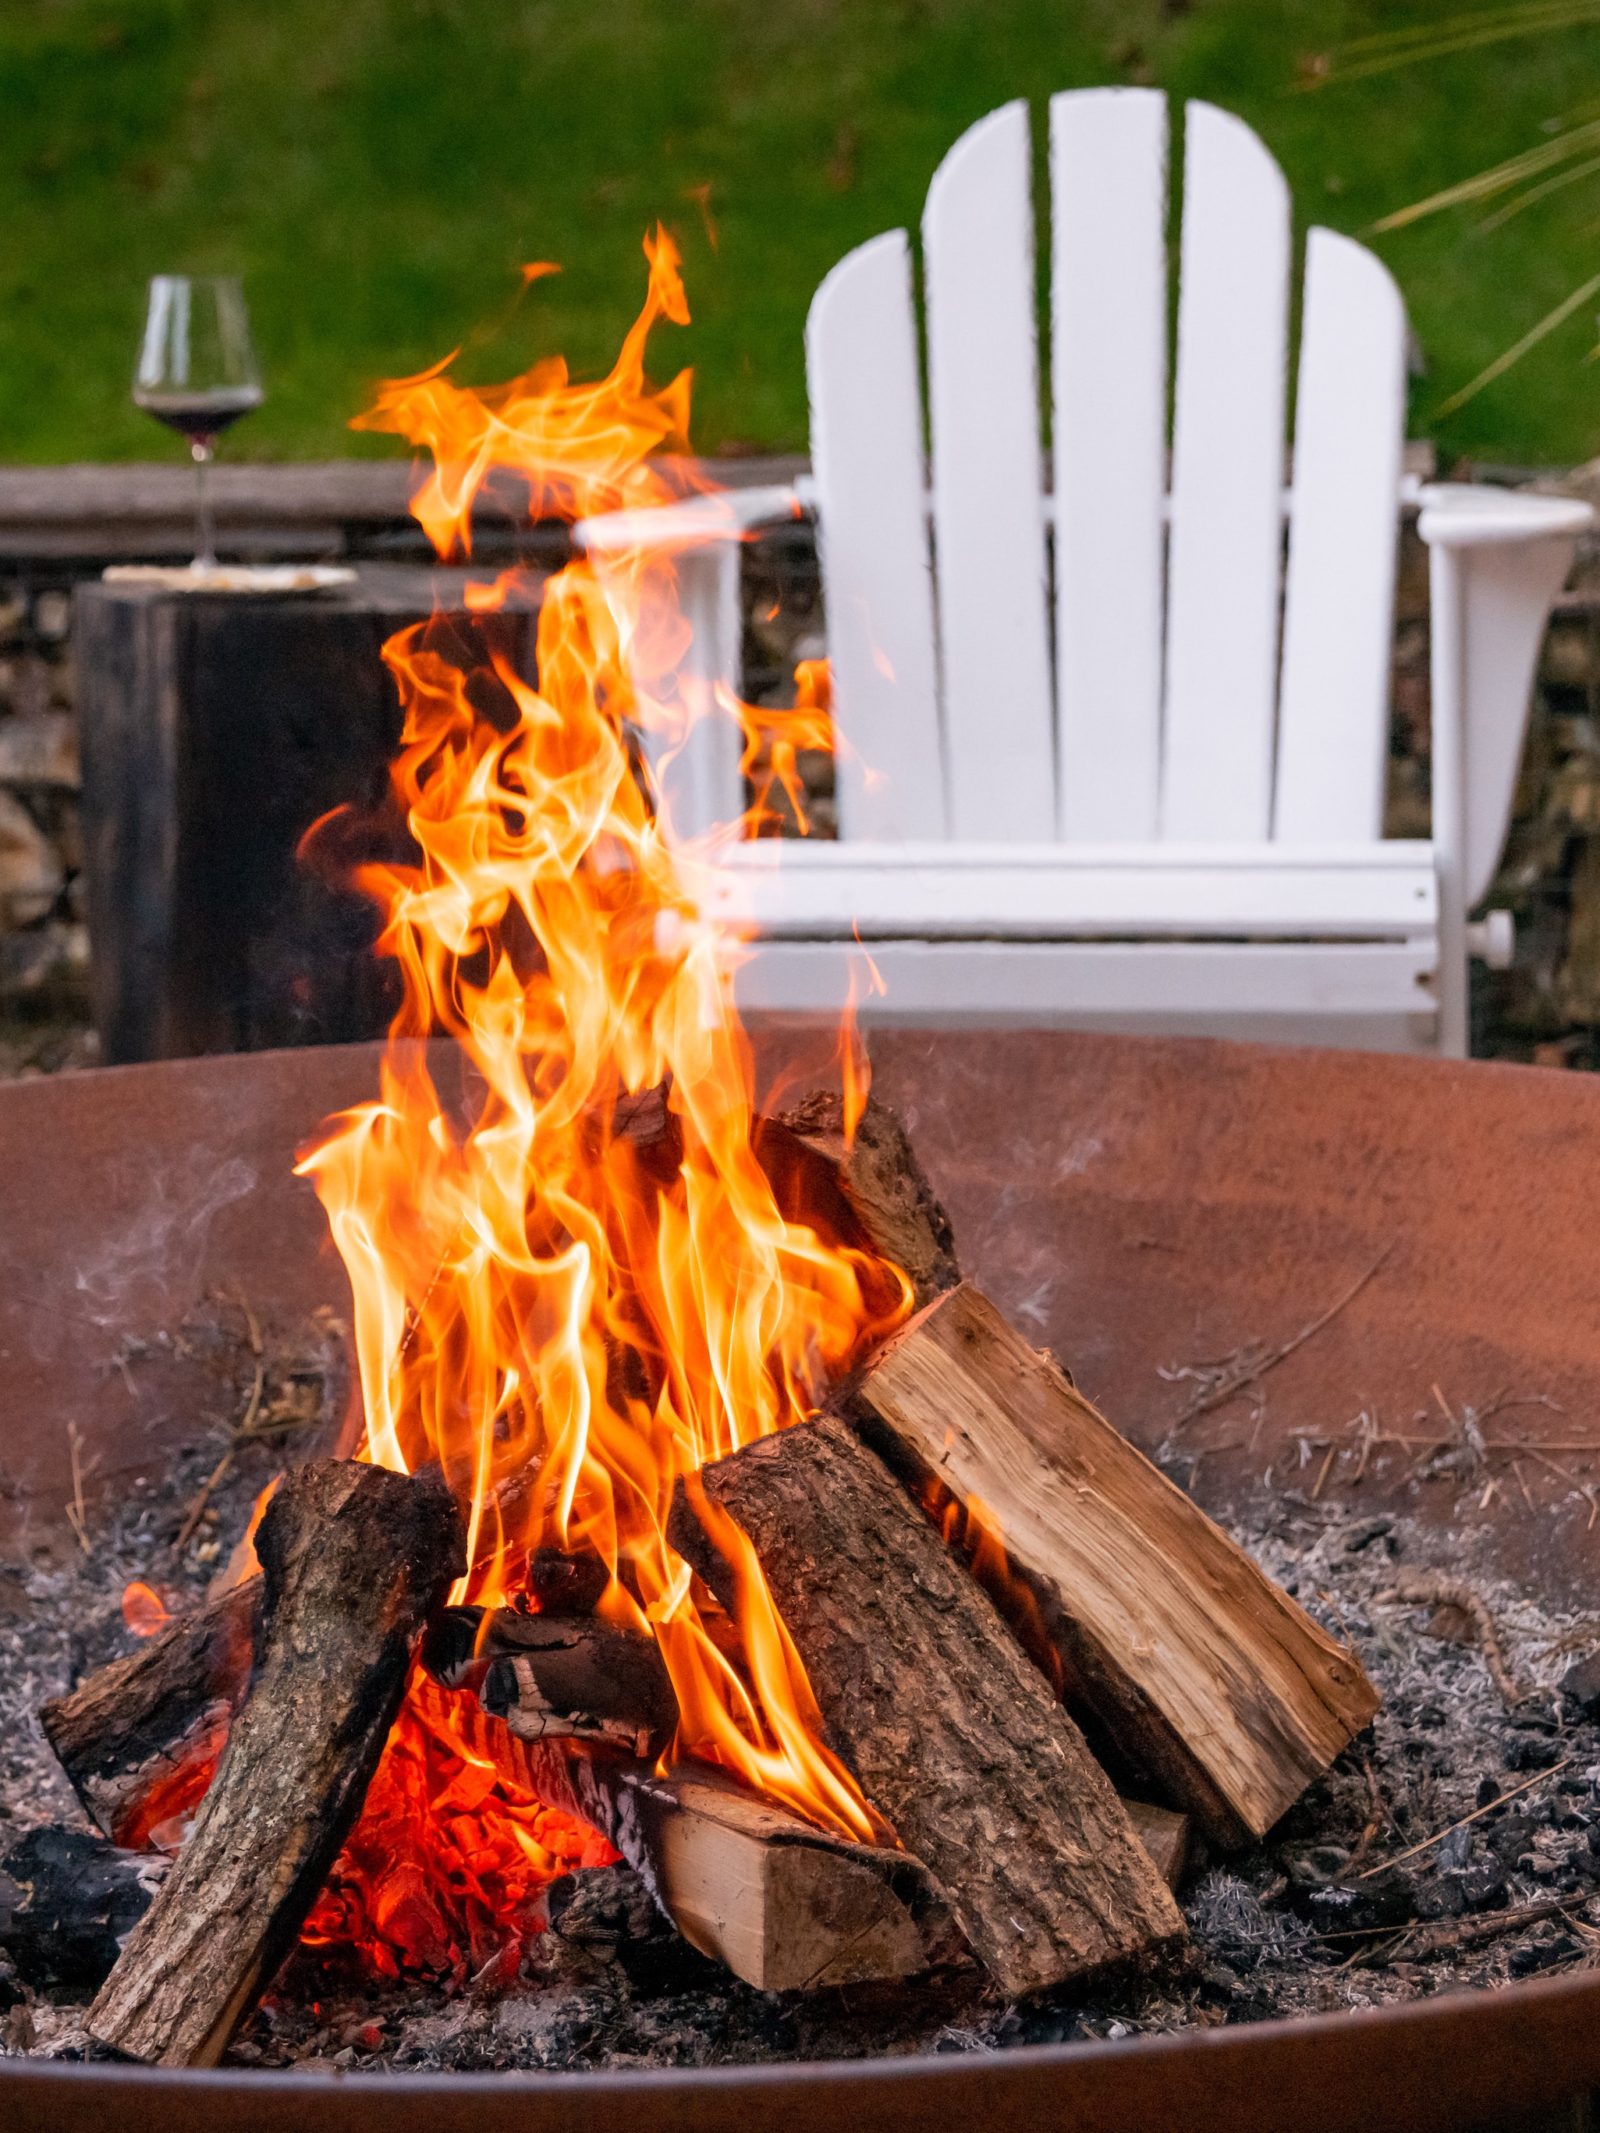 Fire Pit On Your Wood Or Composite Deck, Fire Pit For Deck Use